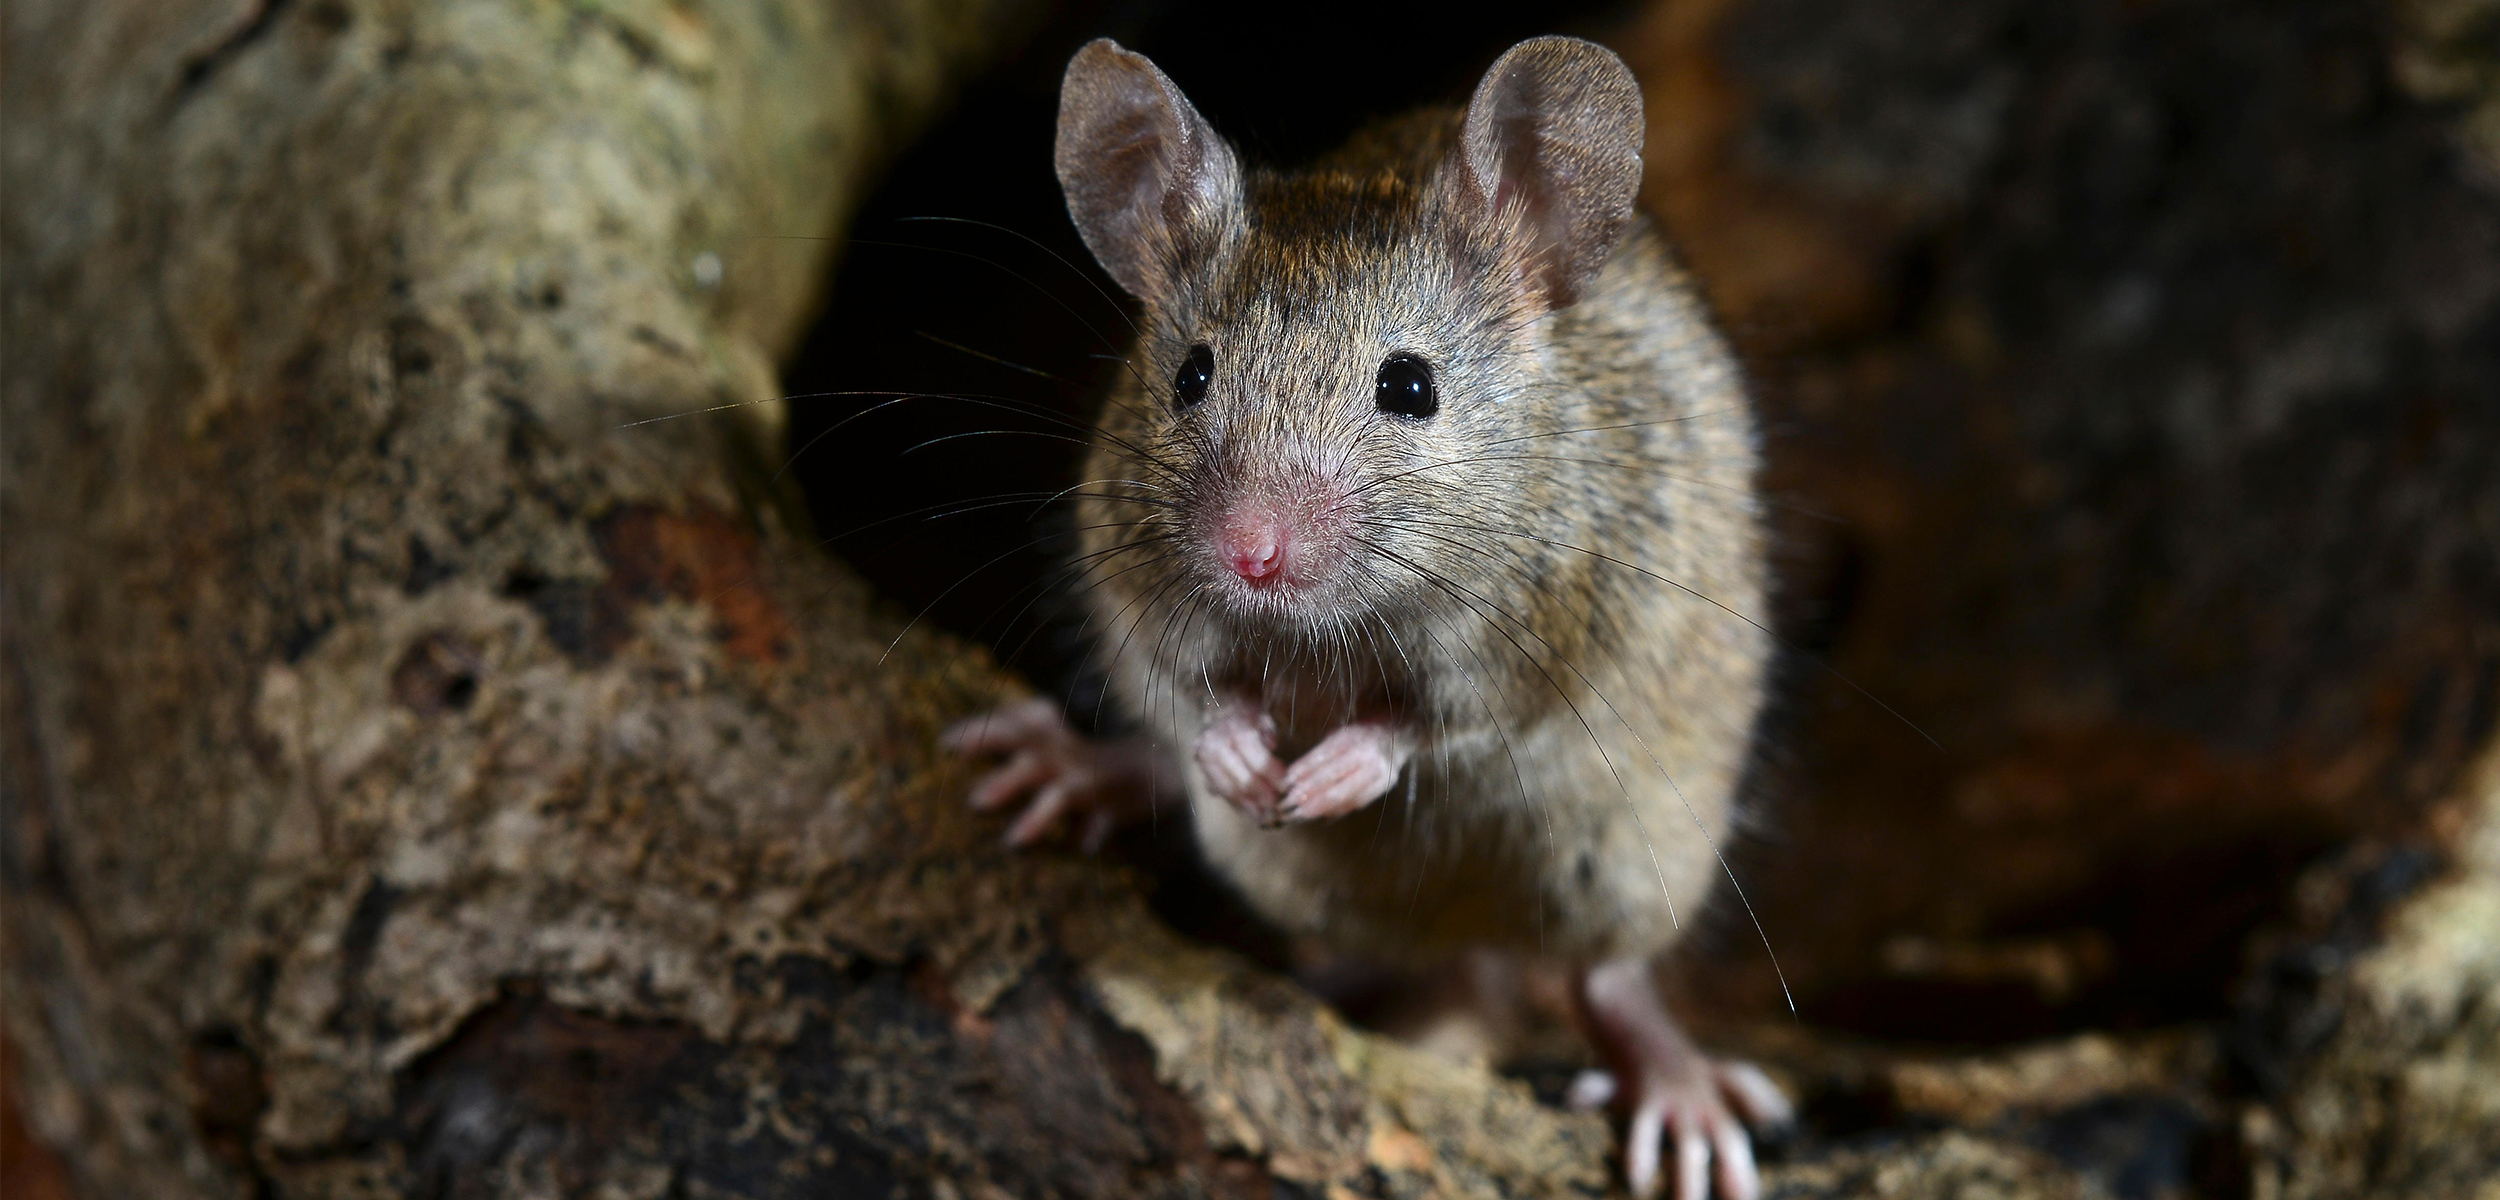 A litle brown mouse standing on top of brown rocks with a dark cave like background